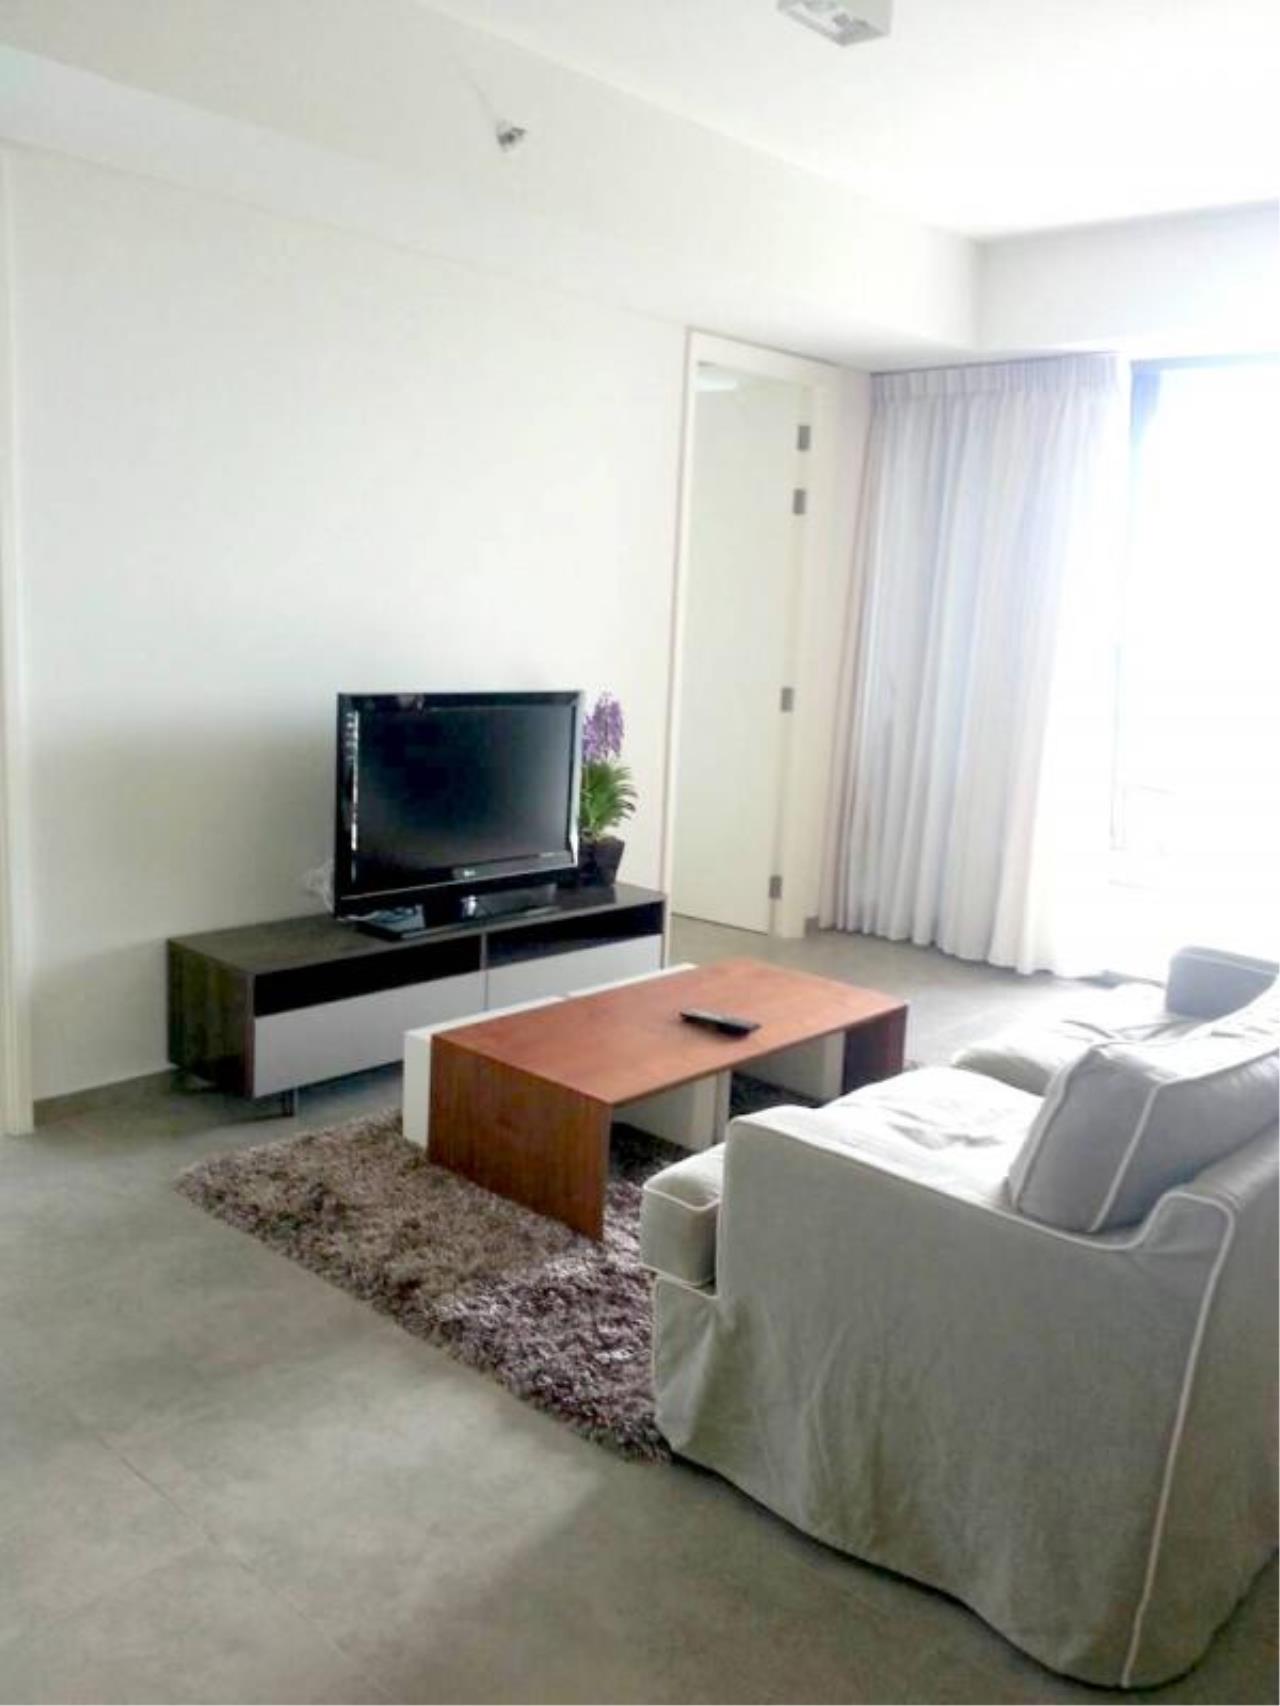 RE/MAX Town & Country Property Agency's Nice condo for rent in Wong Amart 2